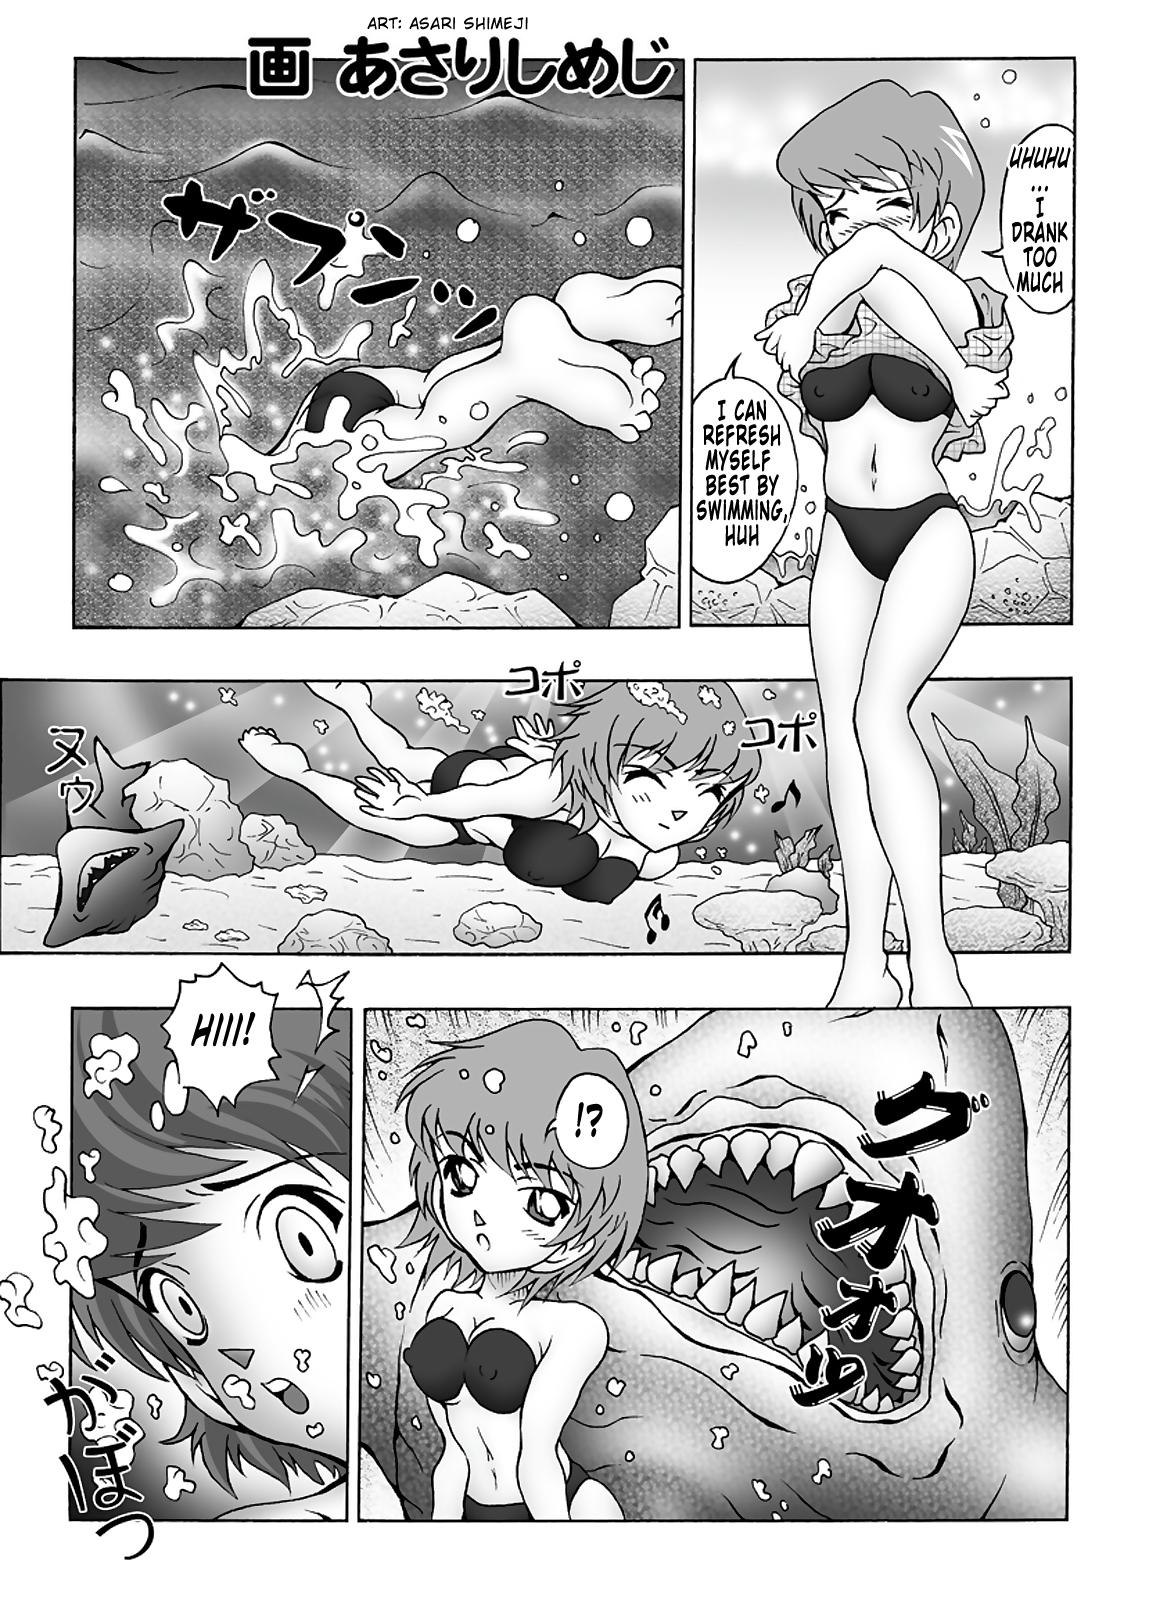 Small Bumbling Detective Conan - File 9: The Mystery Of The Jaws Crime - Detective conan Brazil - Page 4